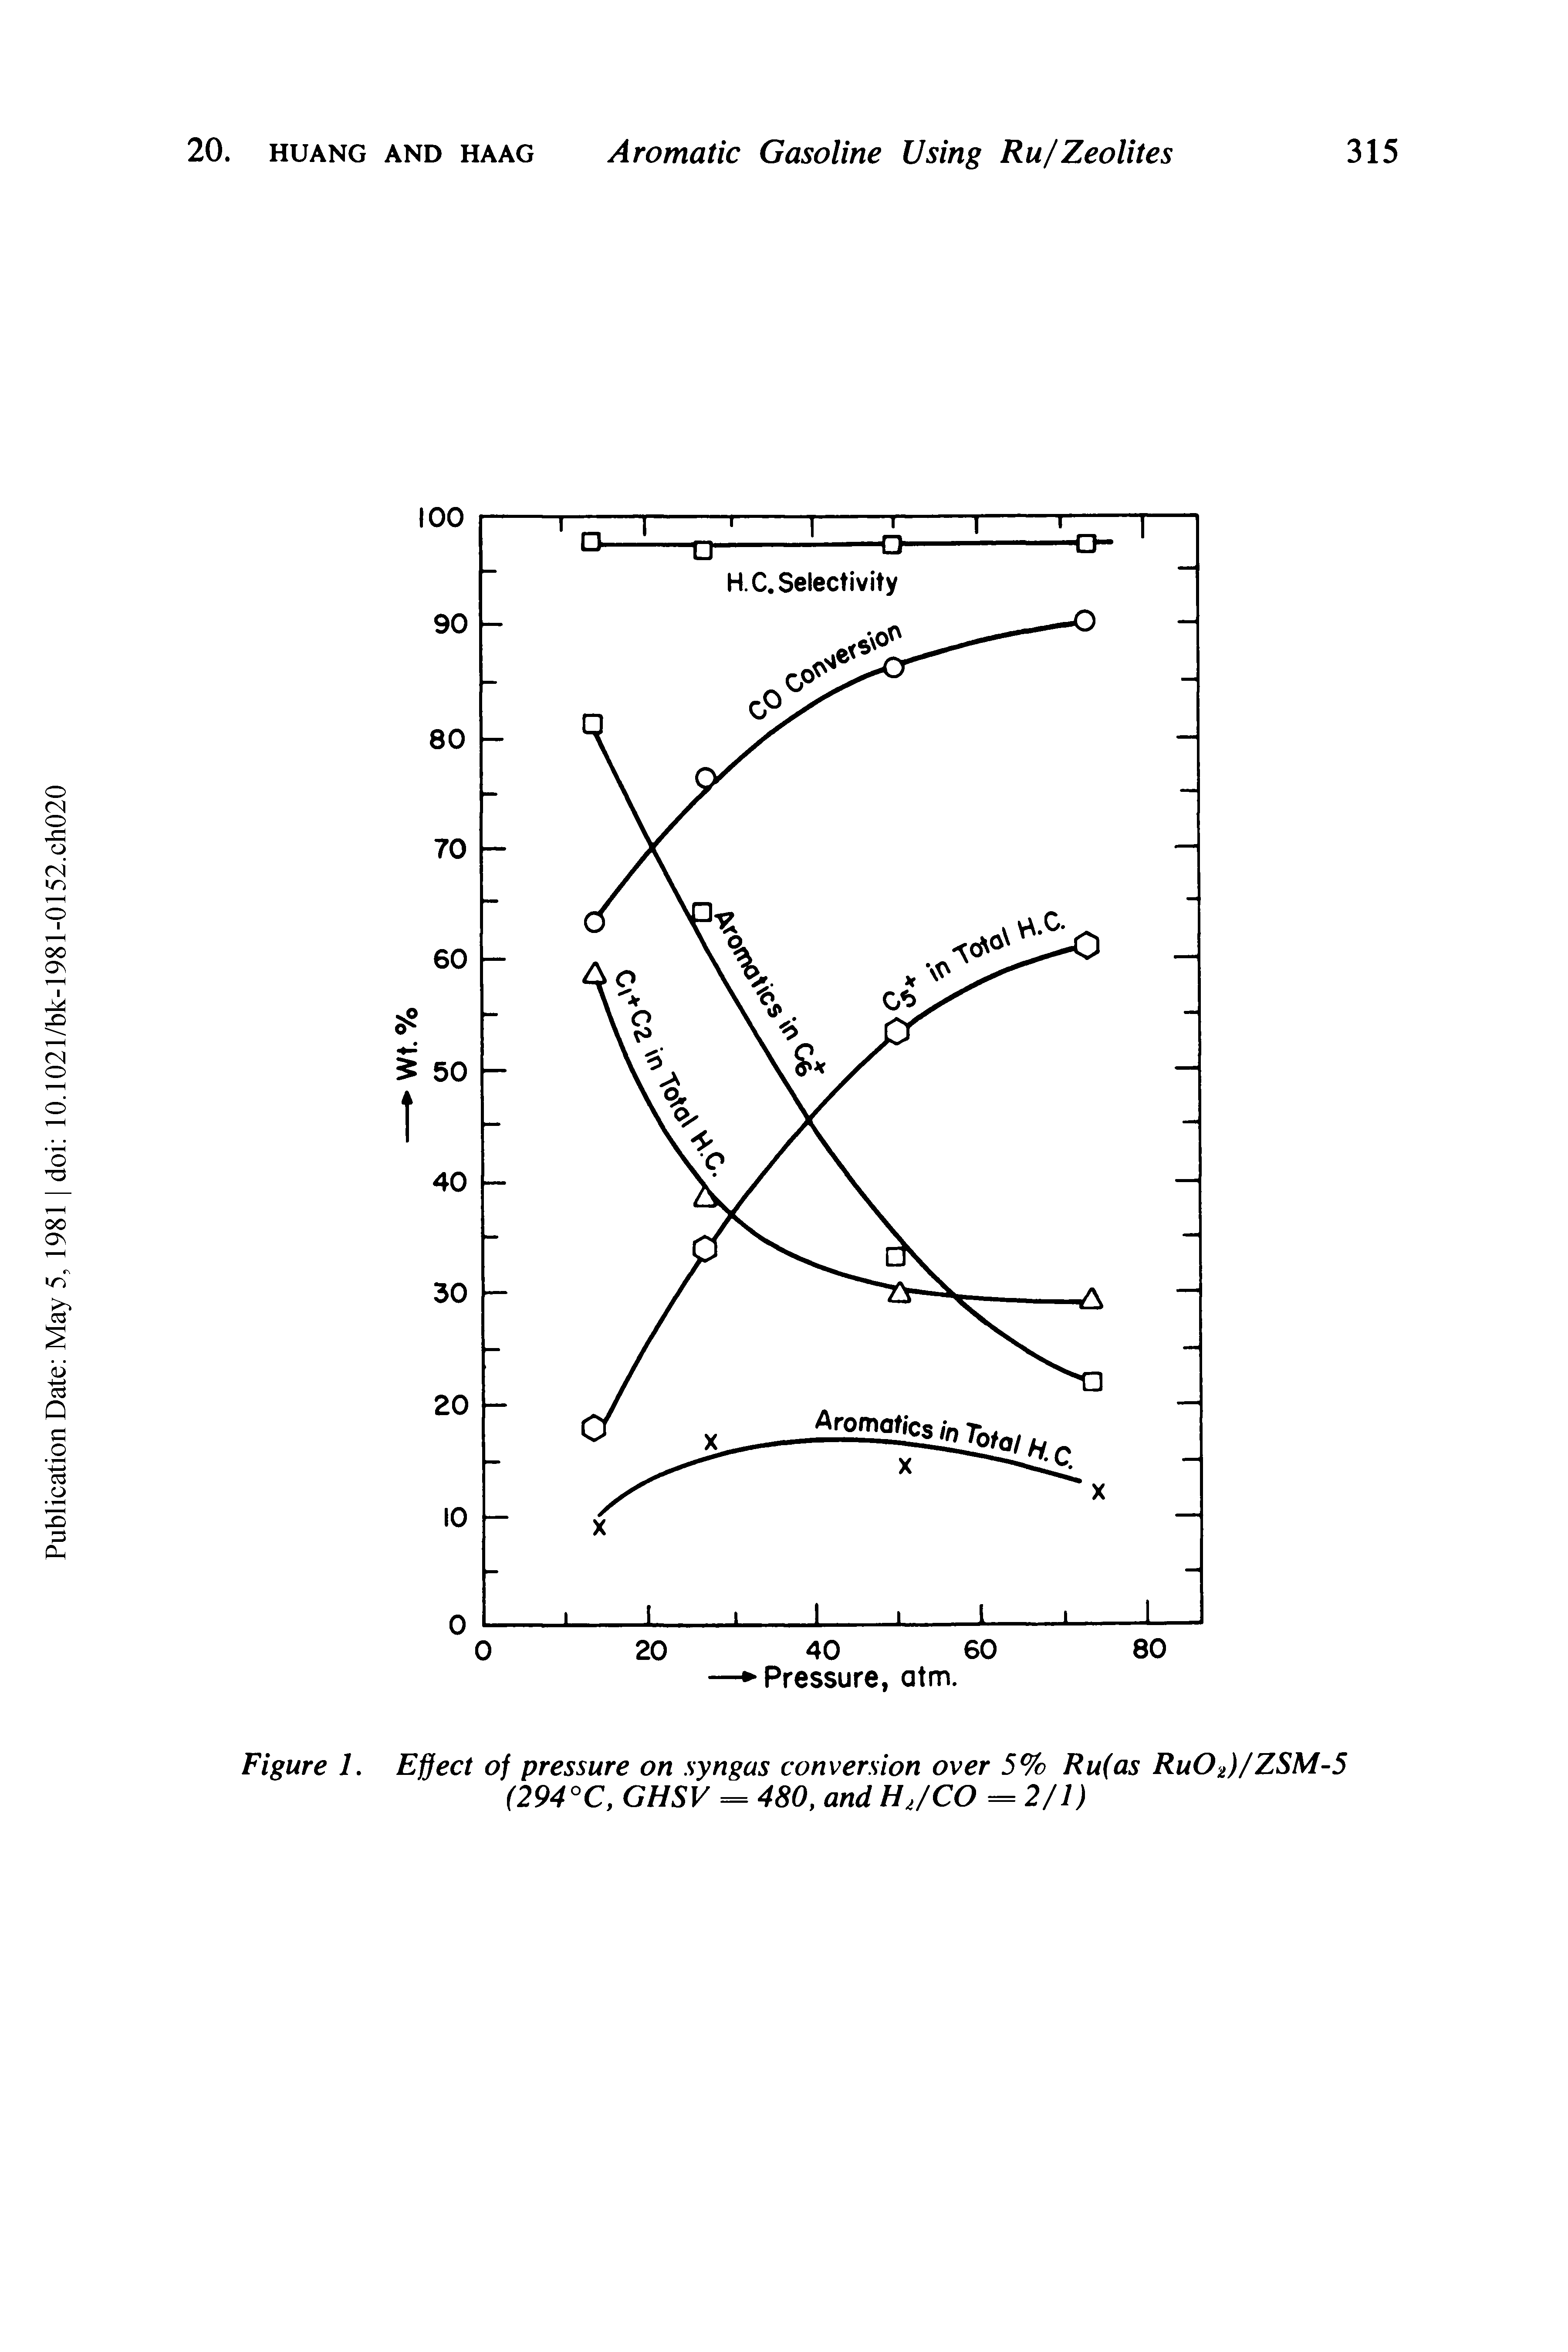 Figure 1. Effect of pressure on syngas conversion over 5% Ru(as Ru02)/ZSM-5 (294°C, GHSV = 480, and H2/CO = 2/1)...